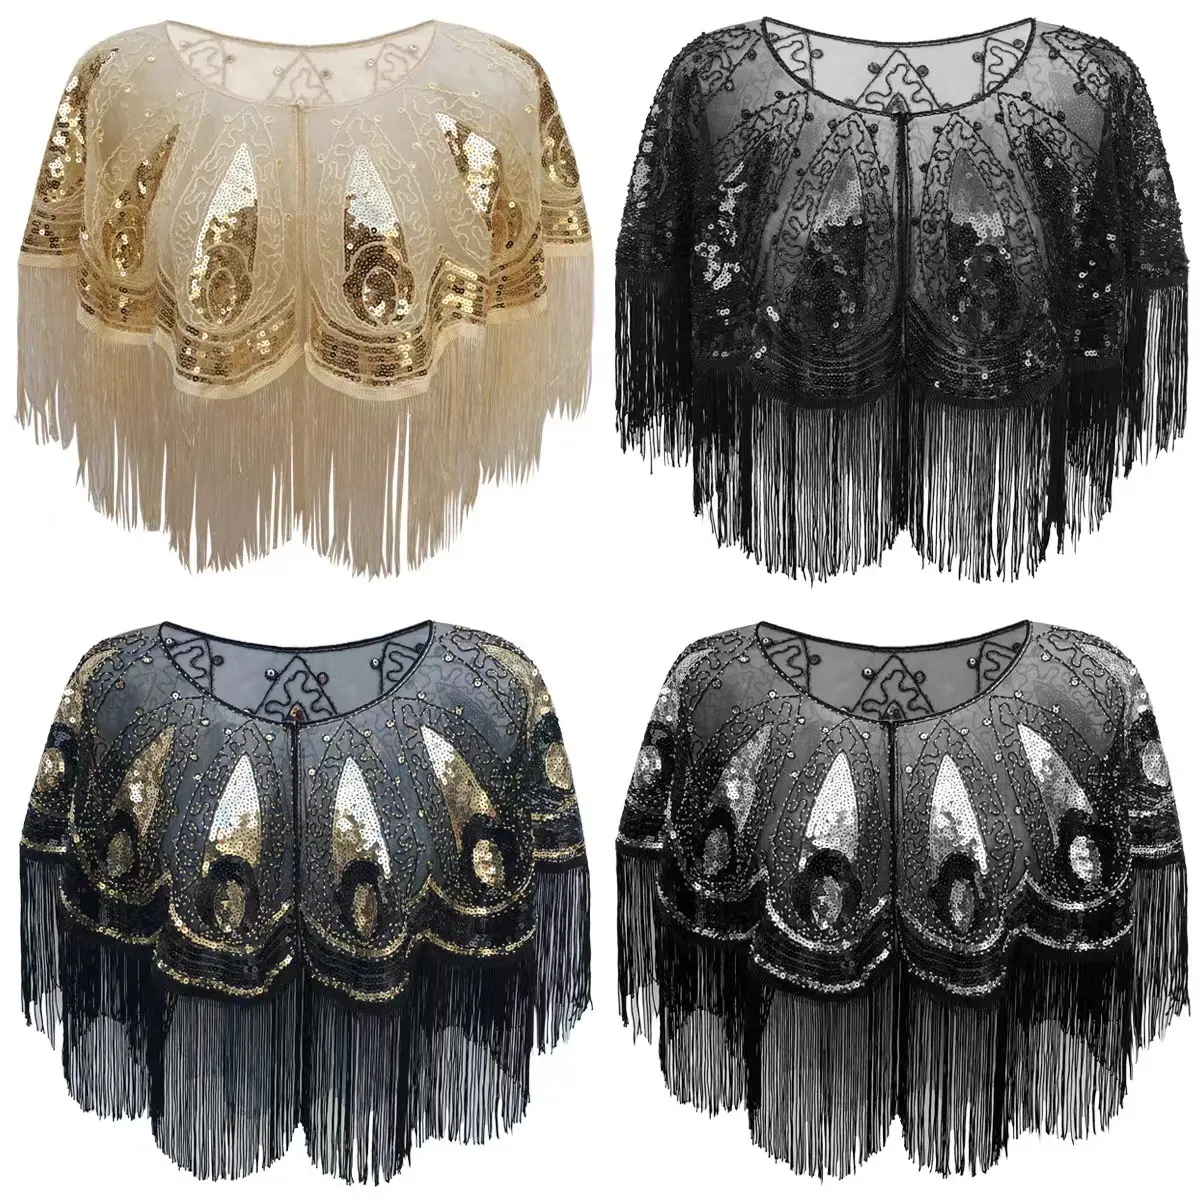 Fashion Diy Chest Collar Polyester sequin fringe 3d Flowers Embroidery Lace Applique Patches